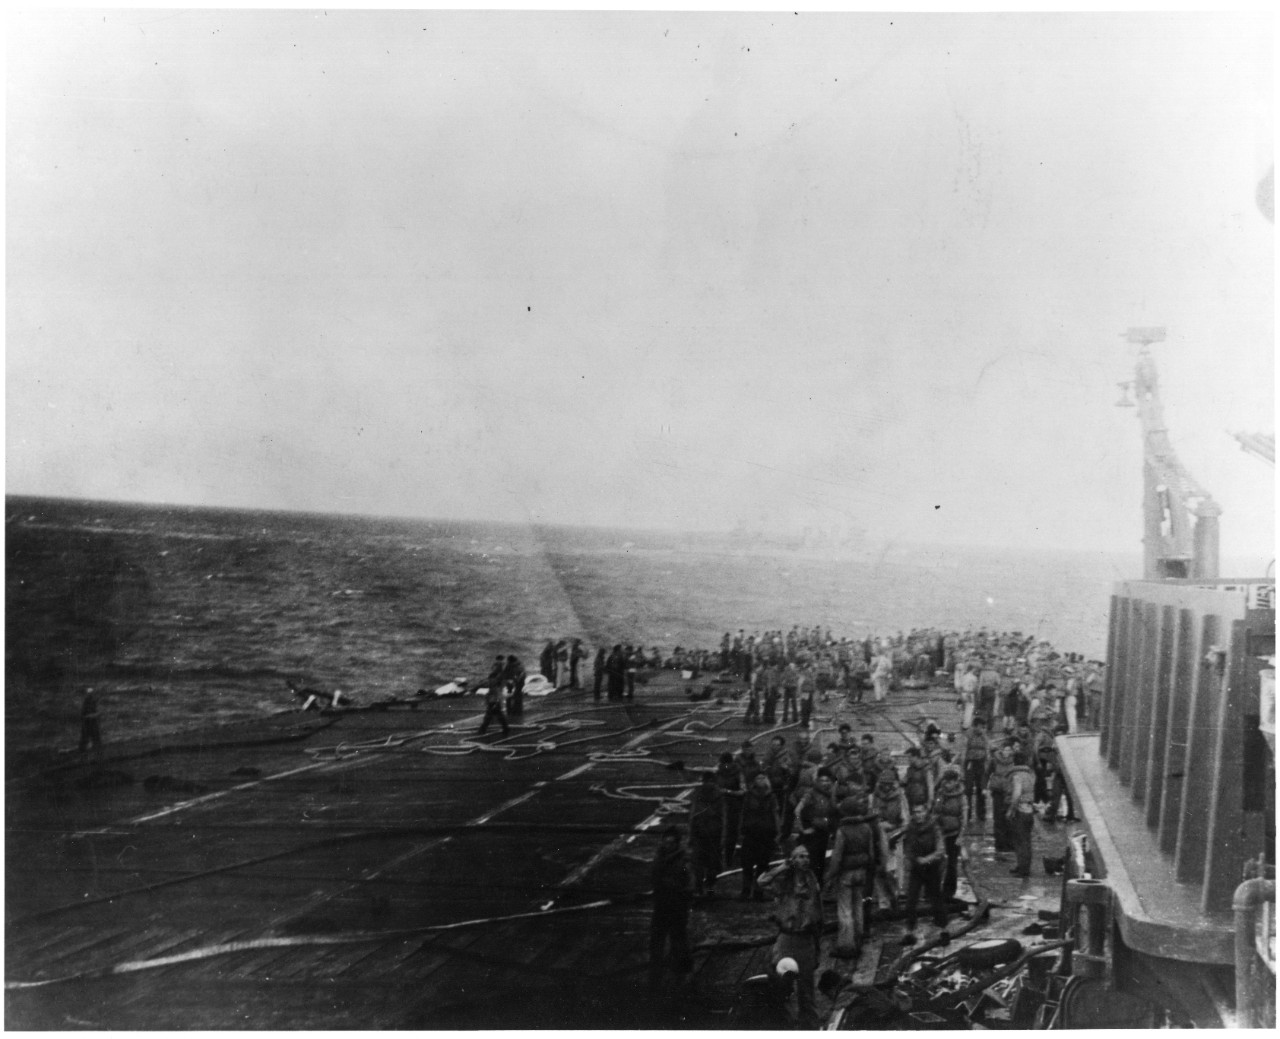 Photo #: 80-G-16811  Battle of the Coral Sea, May 1942